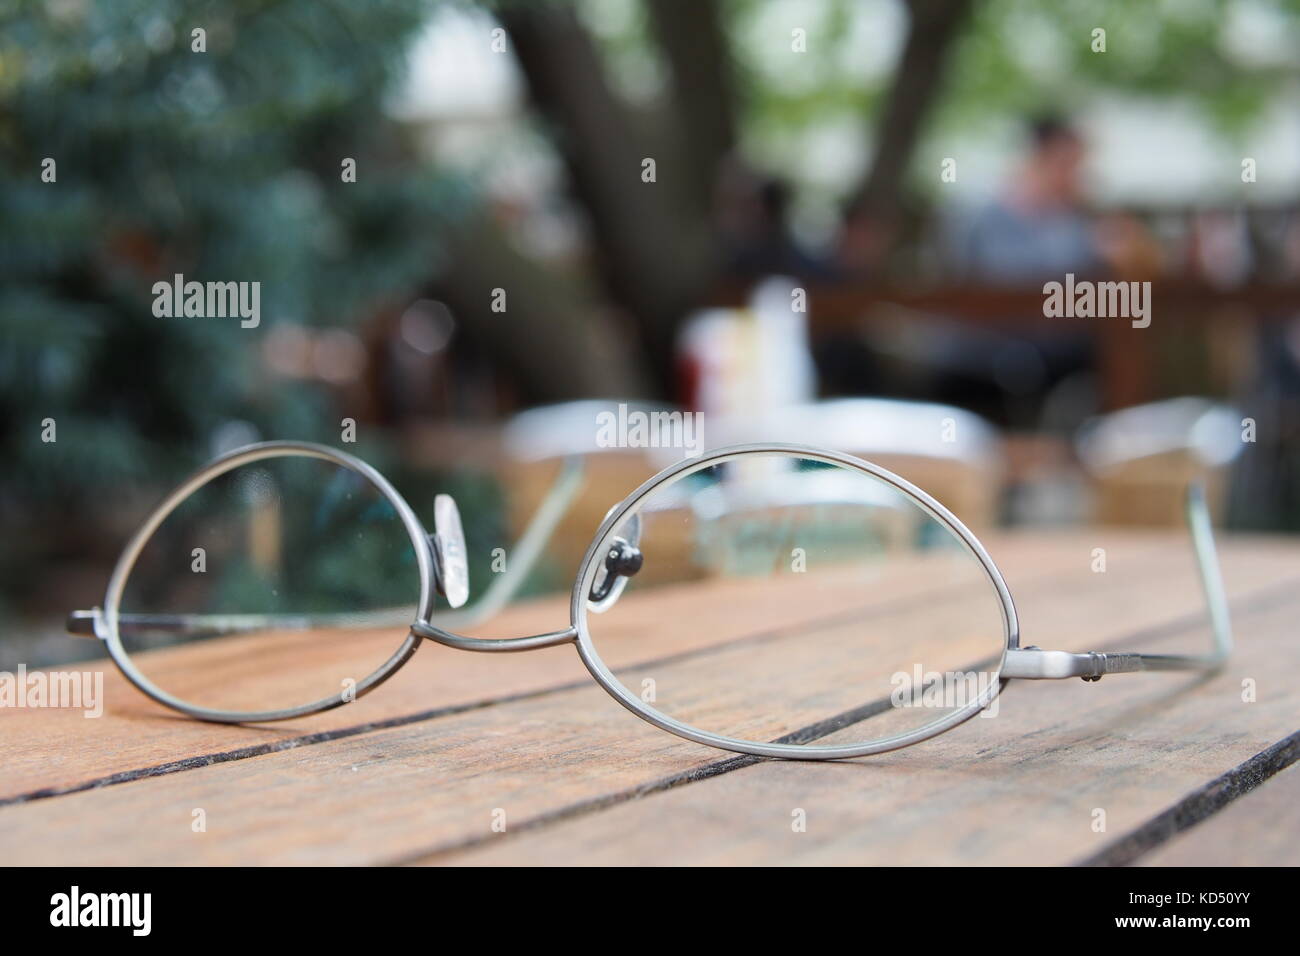 Close up of a pair of reading glasses on an outdoor pub table. Stock Photo